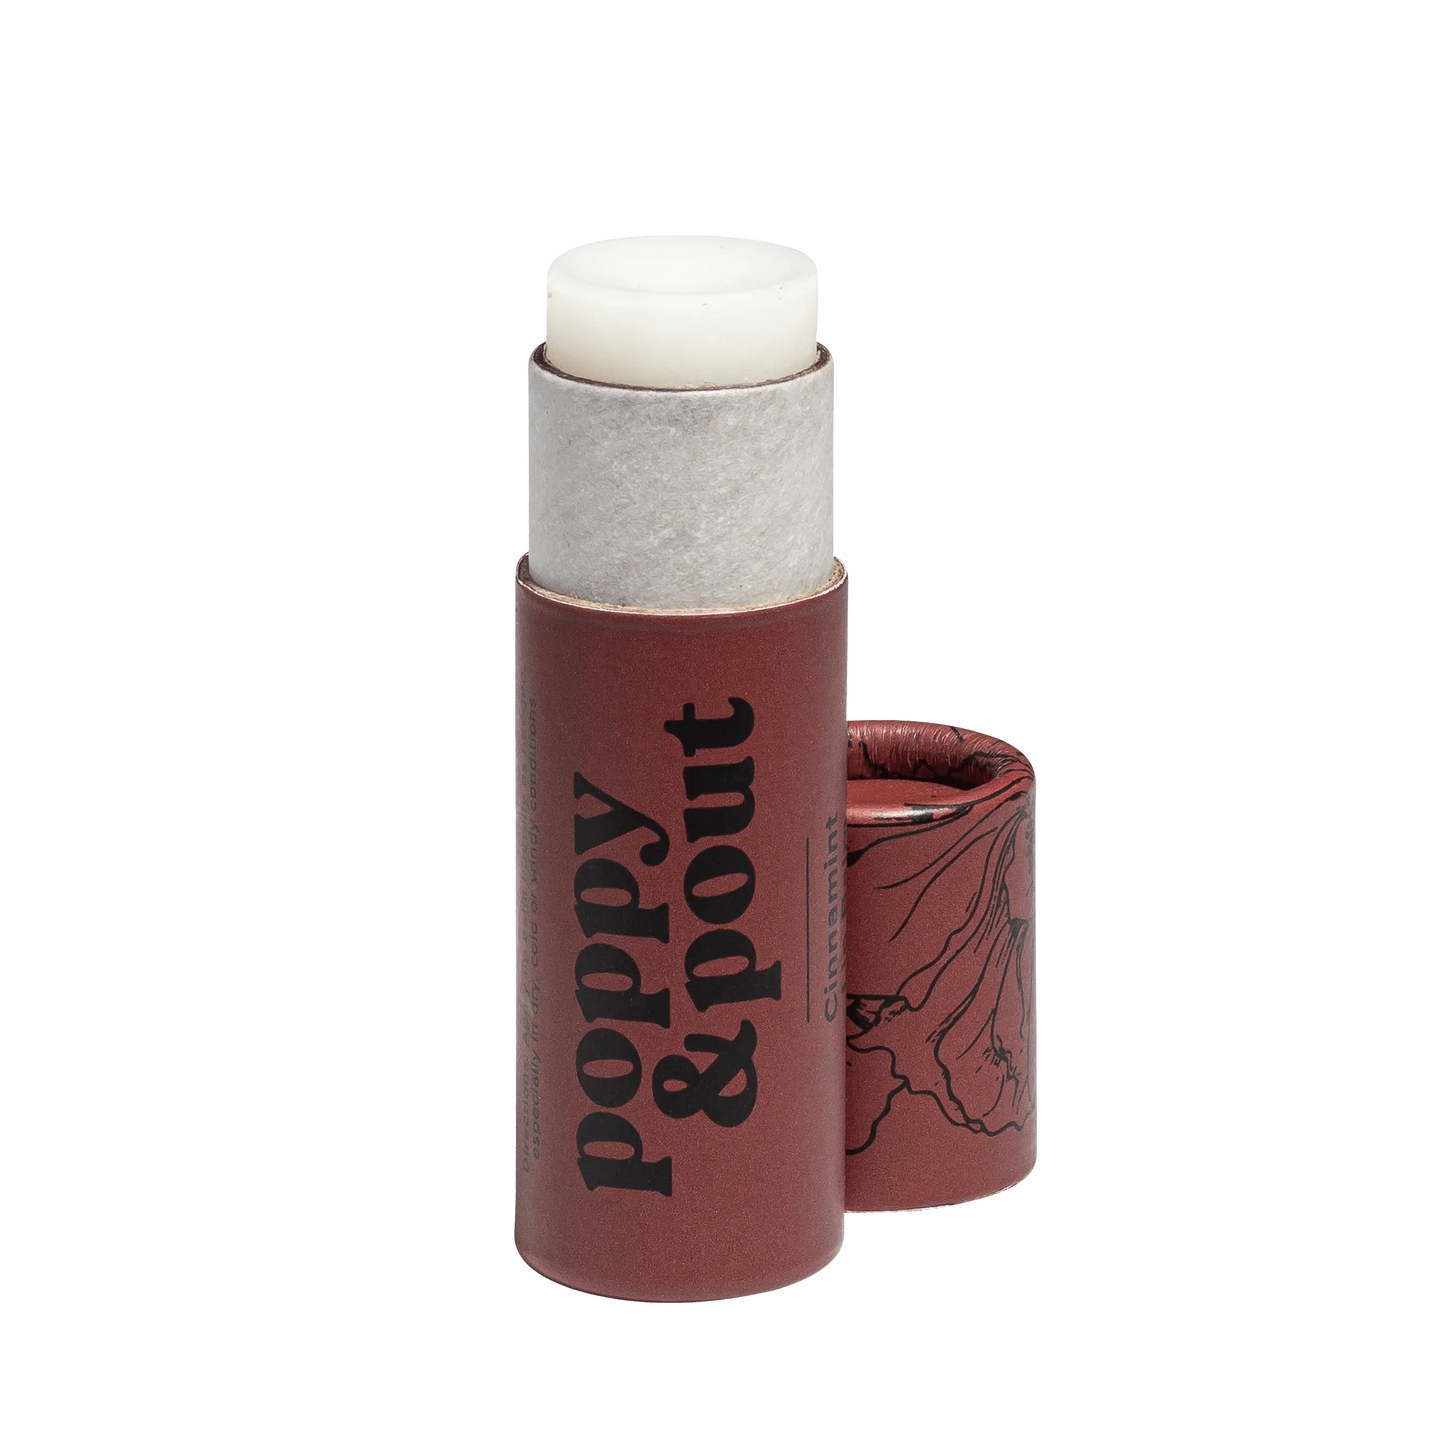 Poppy and Pout Cinnamint Lip Balm